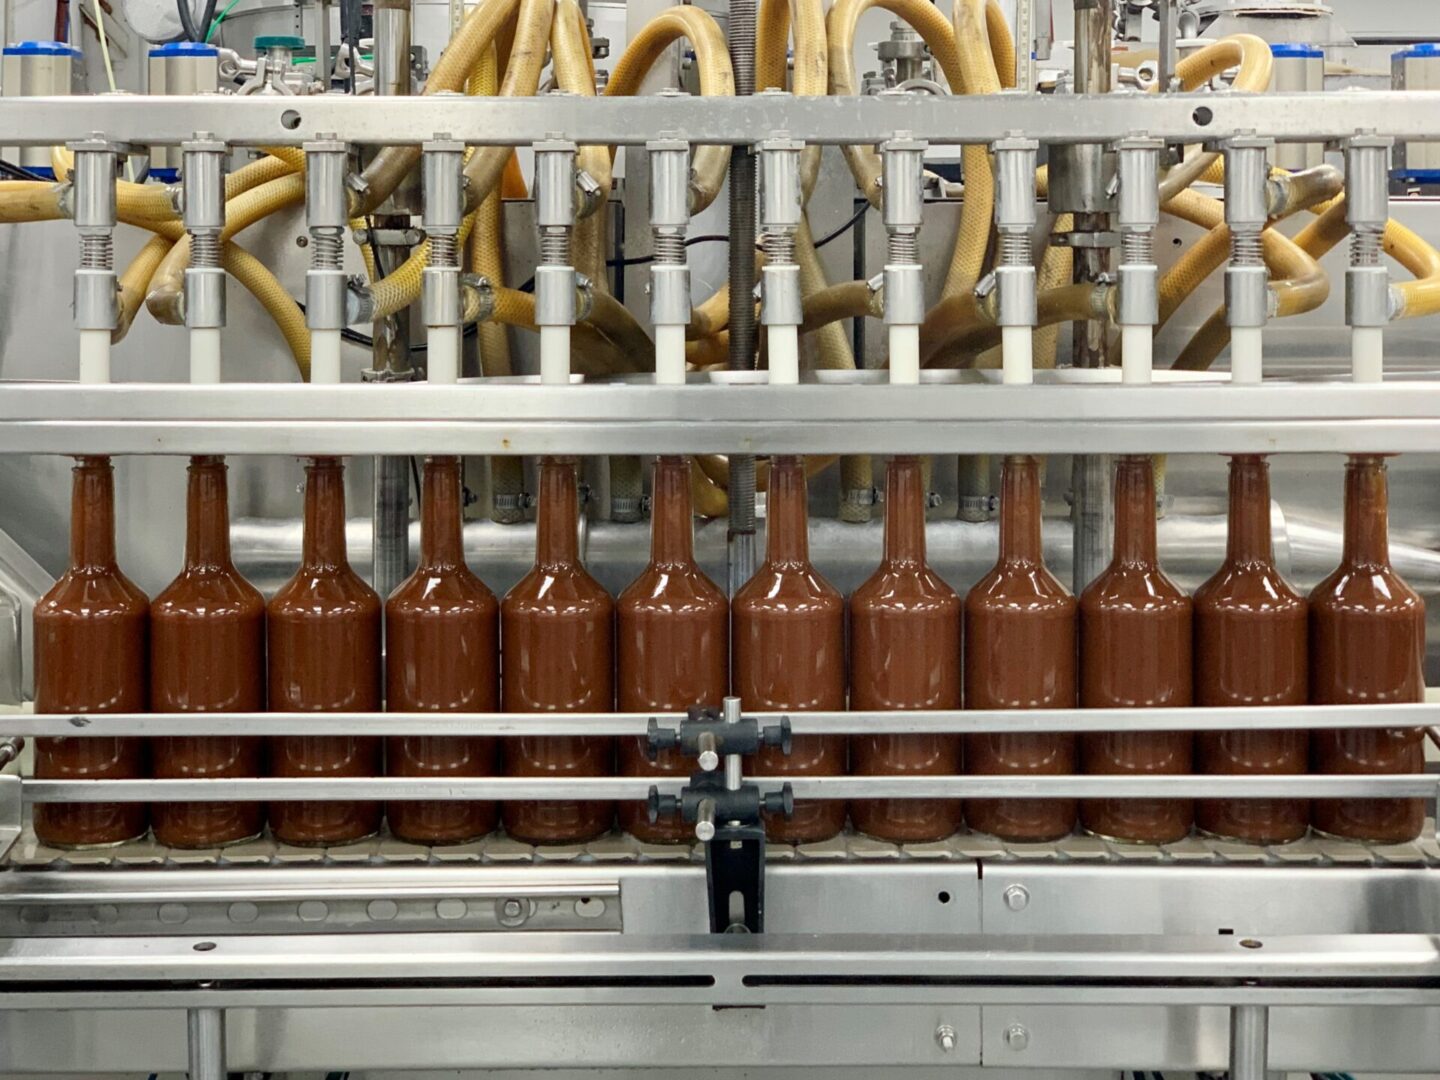 Chocolate liquid being packed in bottles by a machine